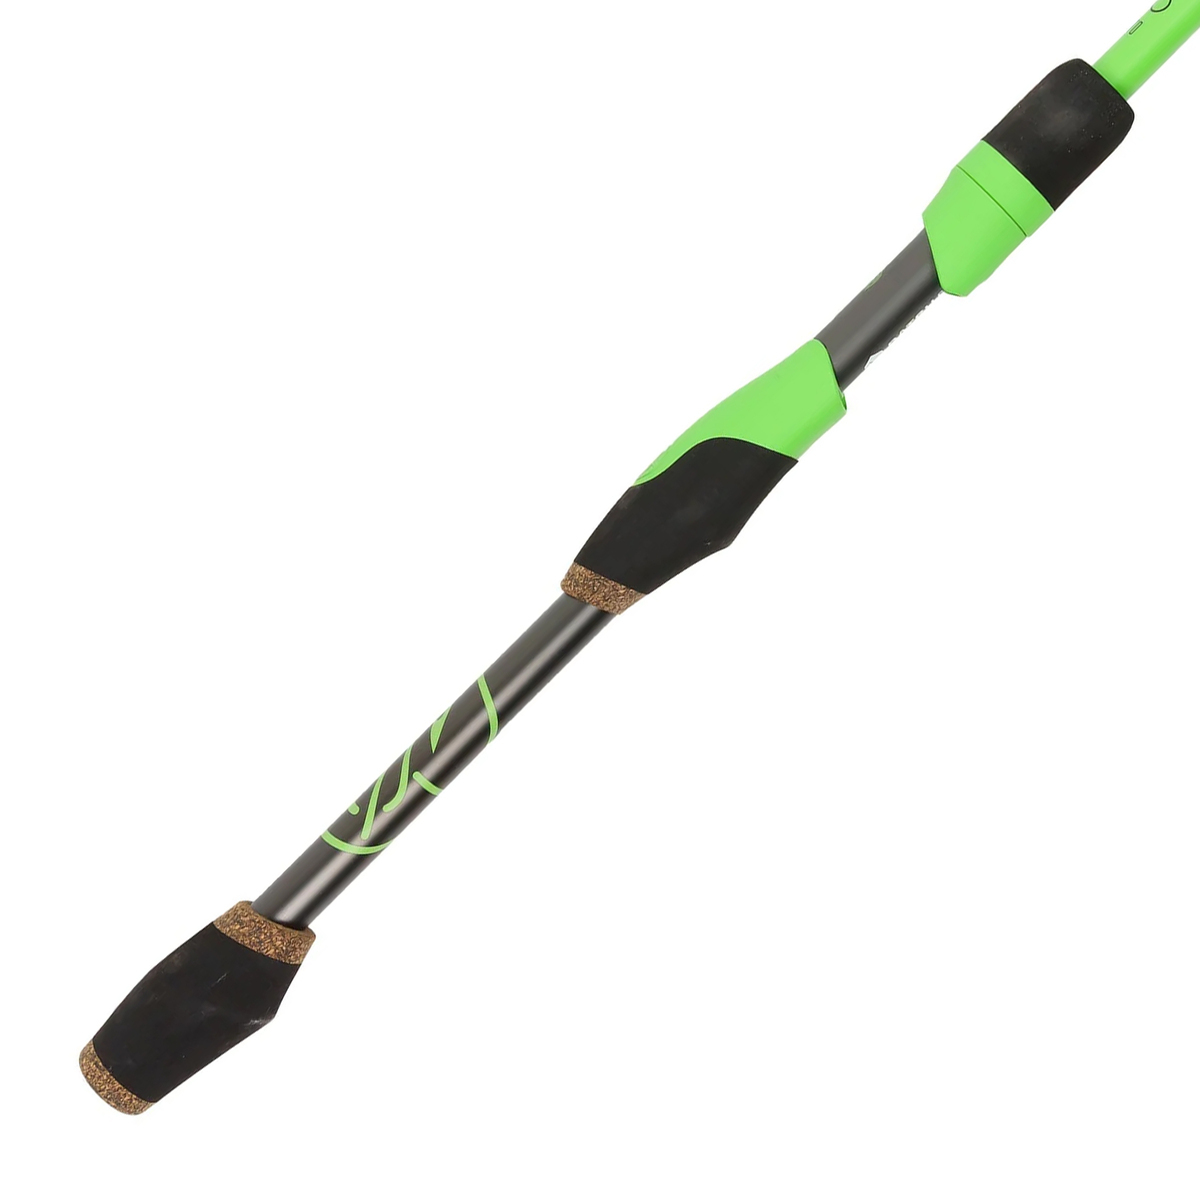 Fishing With The BRAND NEW GOOGAN SQUAD ROD (Green Series), 42% OFF